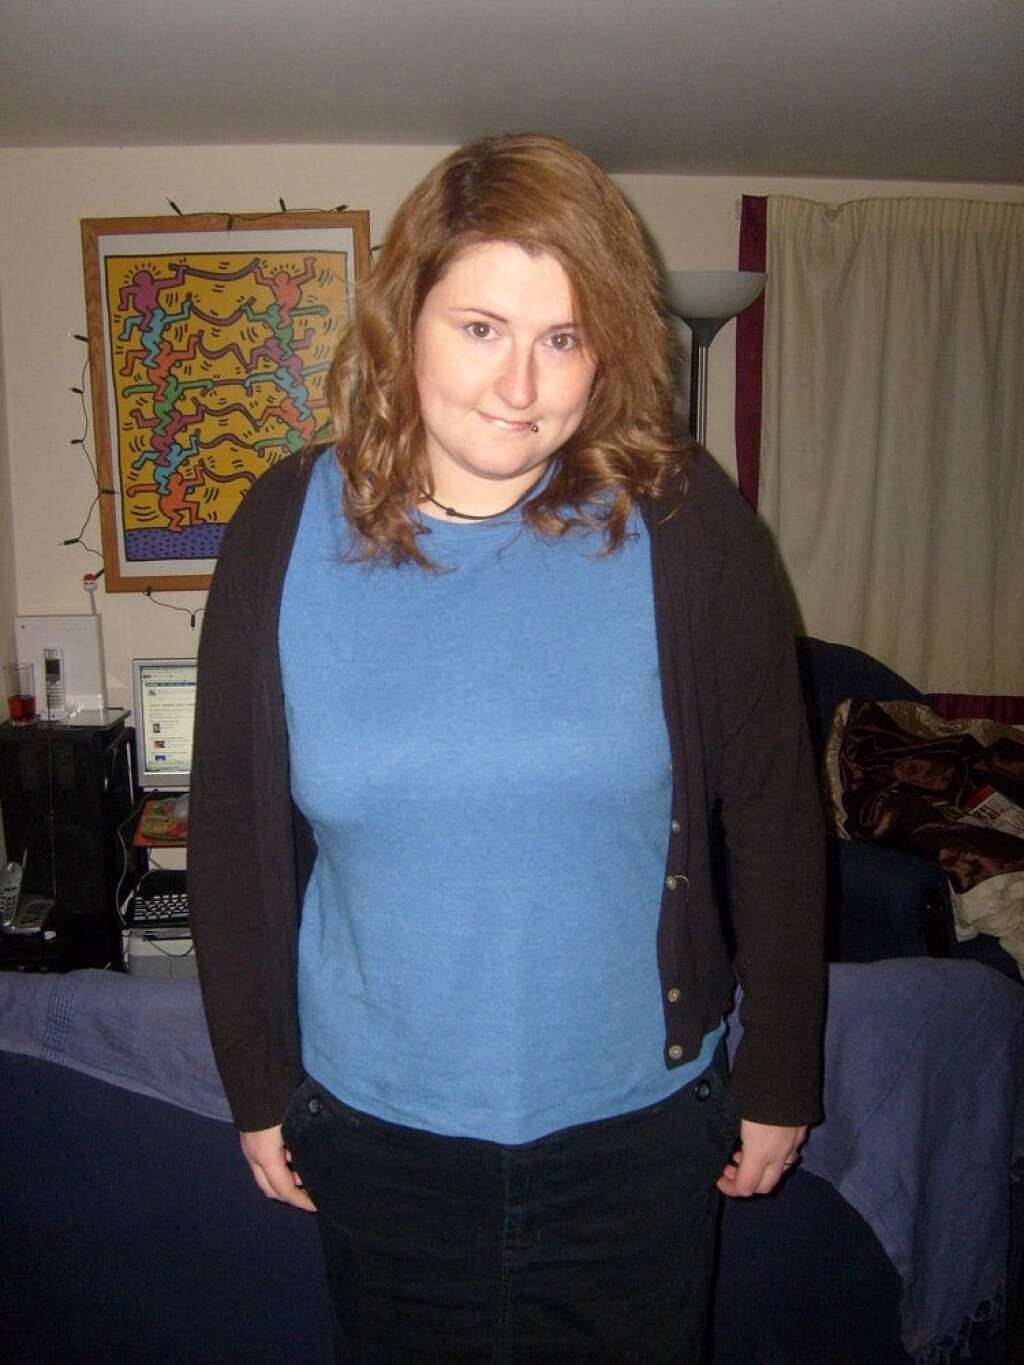 Dannii BEFORE - <a href="http://www.huffingtonpost.com/2013/01/21/i-lost-weight-dannii-martin_n_2459151.html">Read Dannii's story here.</a>